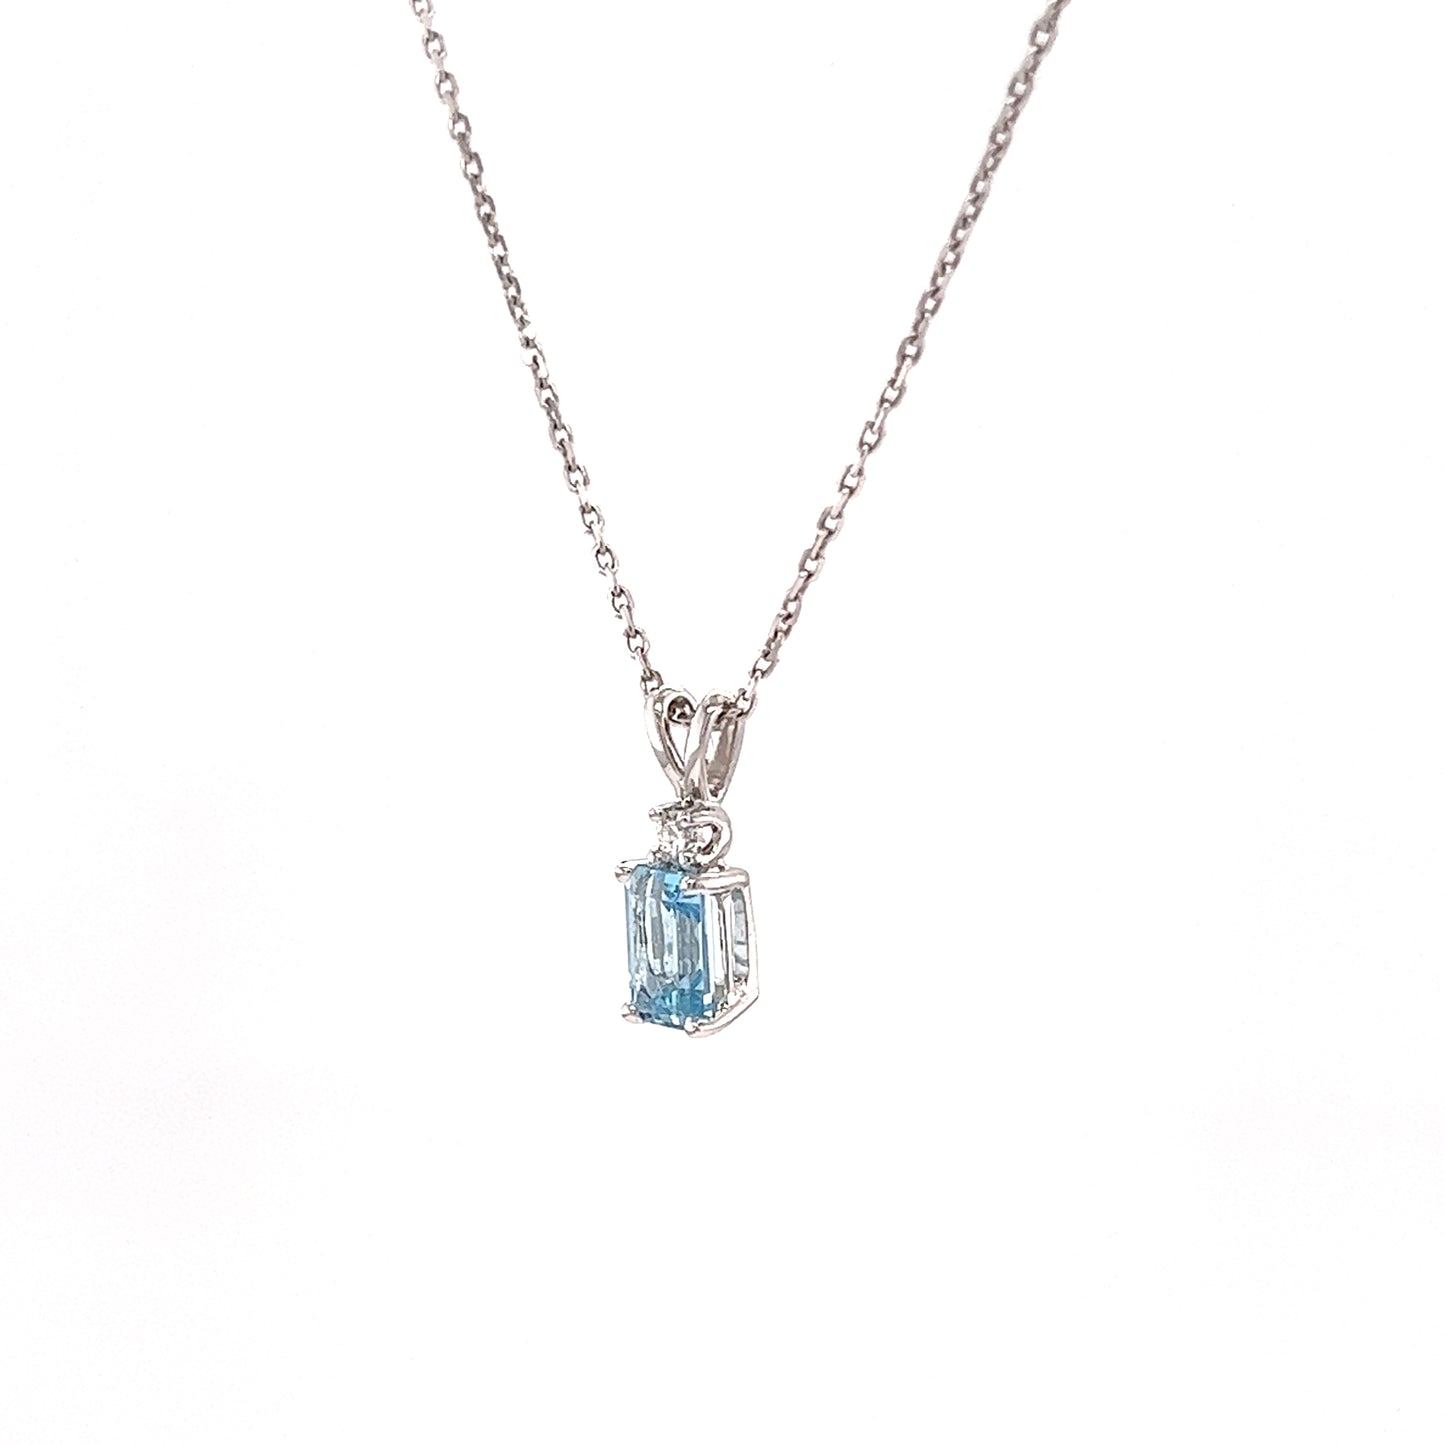 Baguette Aquamarine Pendant with One Side Diamond in 14K White Gold Right Side View with Chain